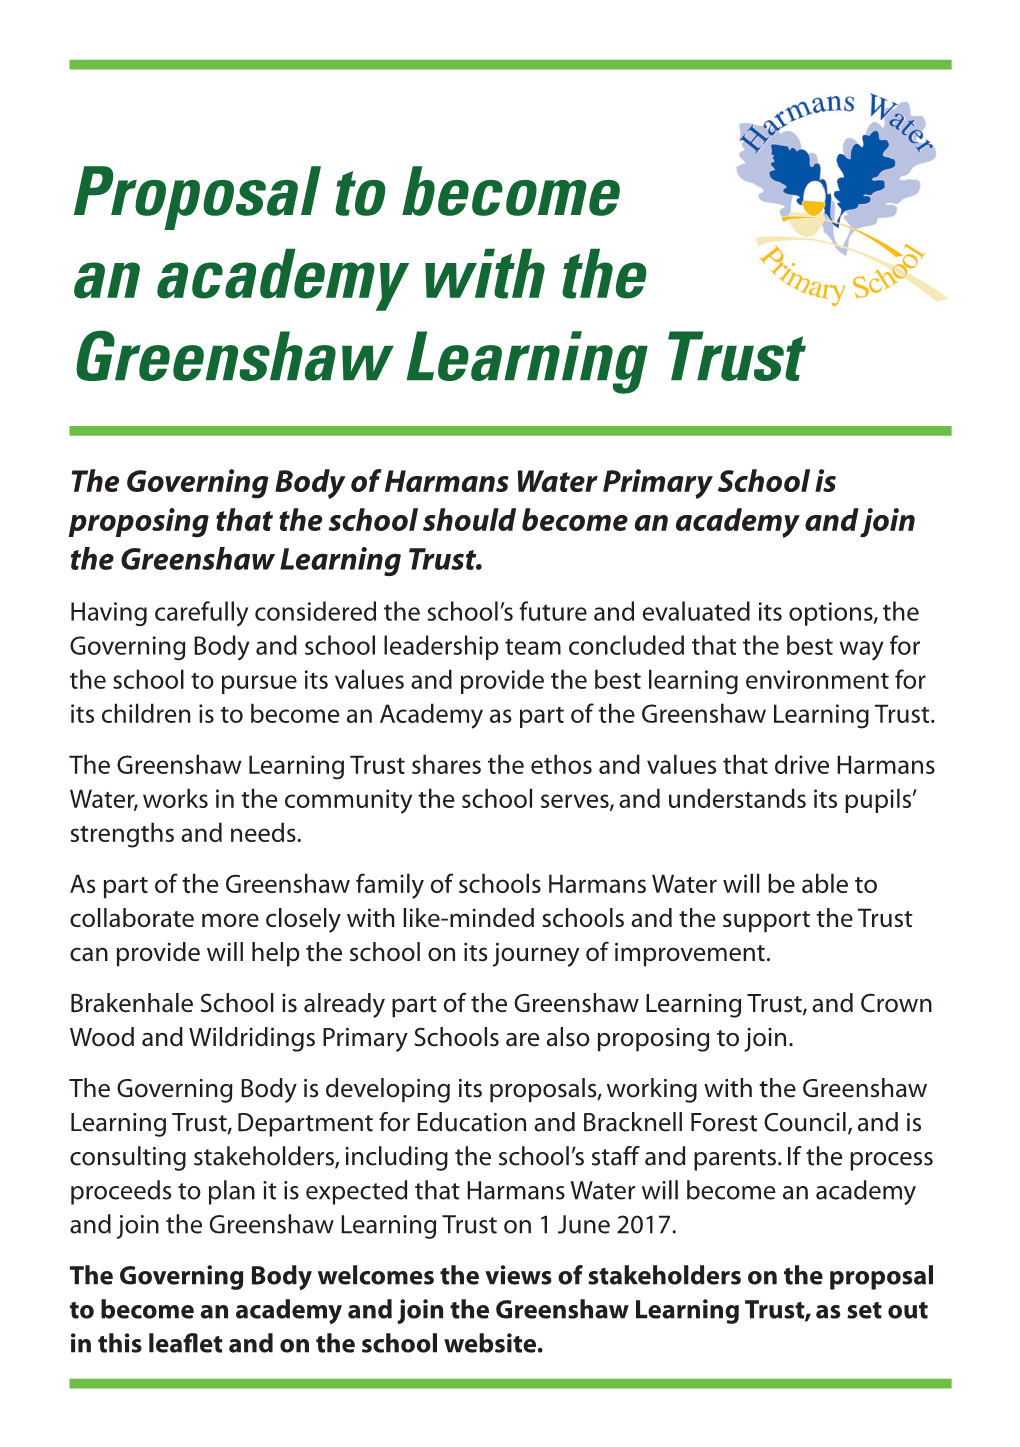 Proposal to Become an Academy with the Greenshaw Learning Trust